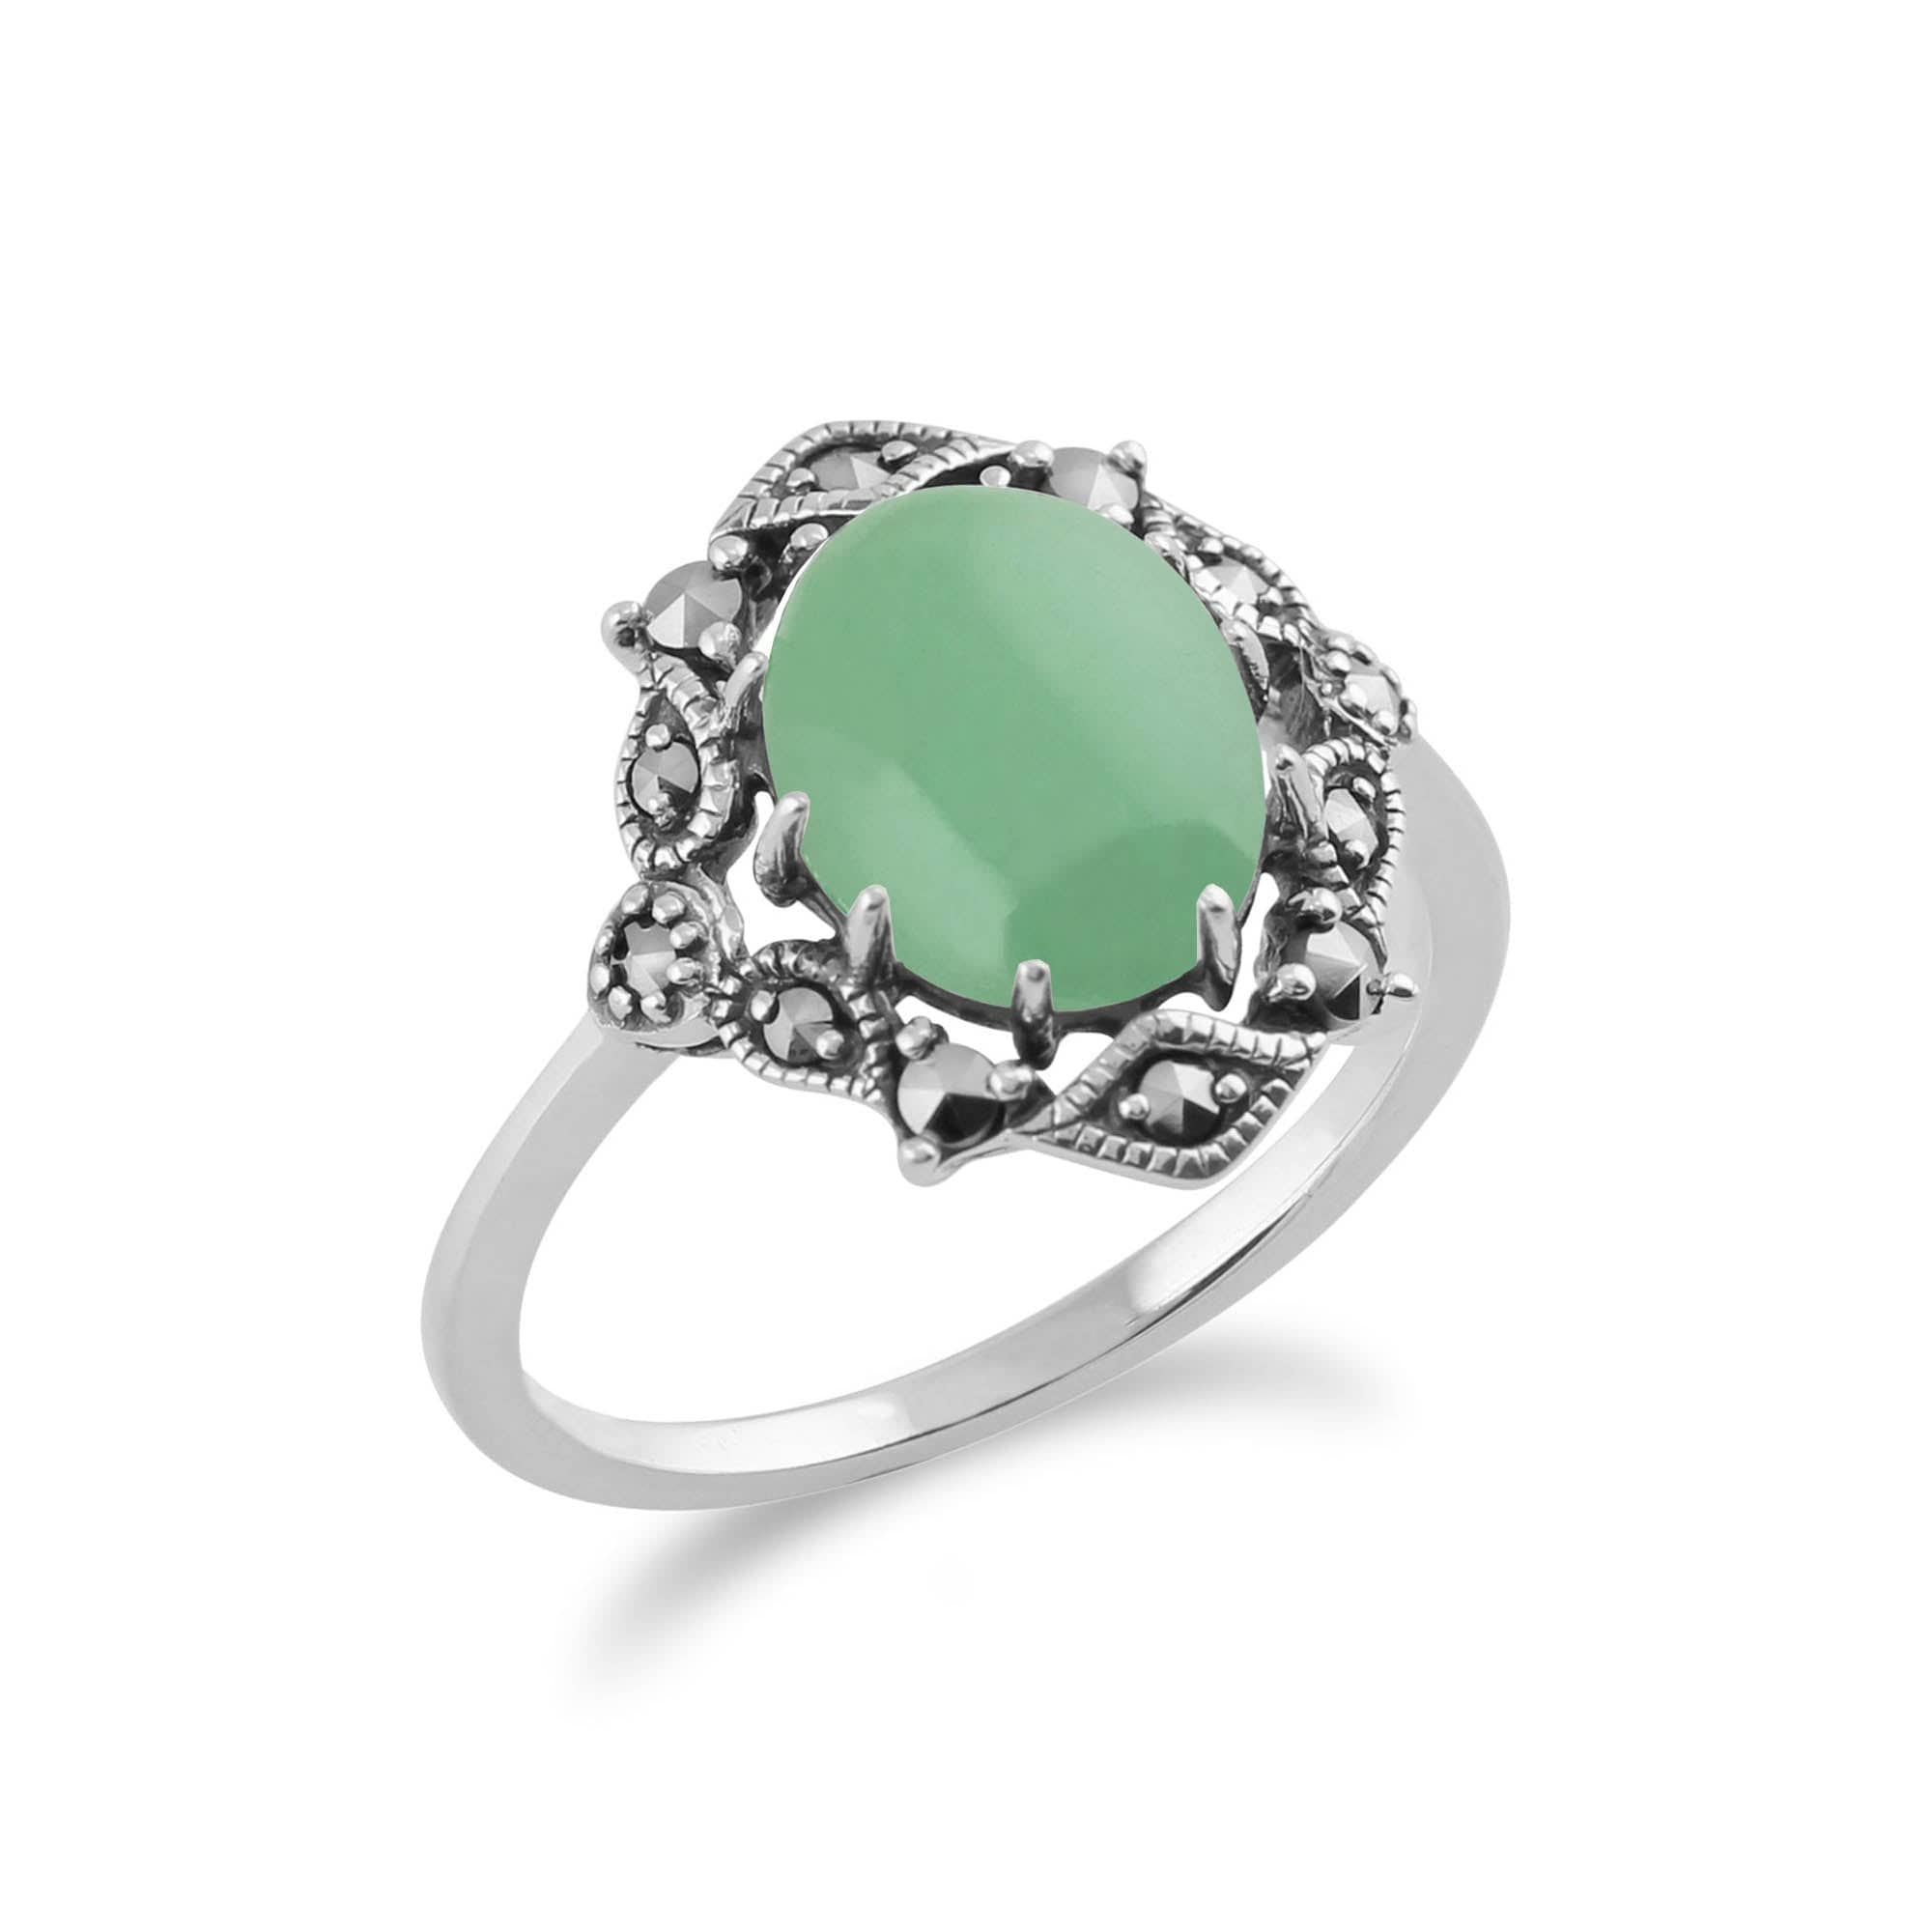 214R480010925 Art Nouveau Style Oval Green Jade Cabochon & Marcasite Statement Ring 2